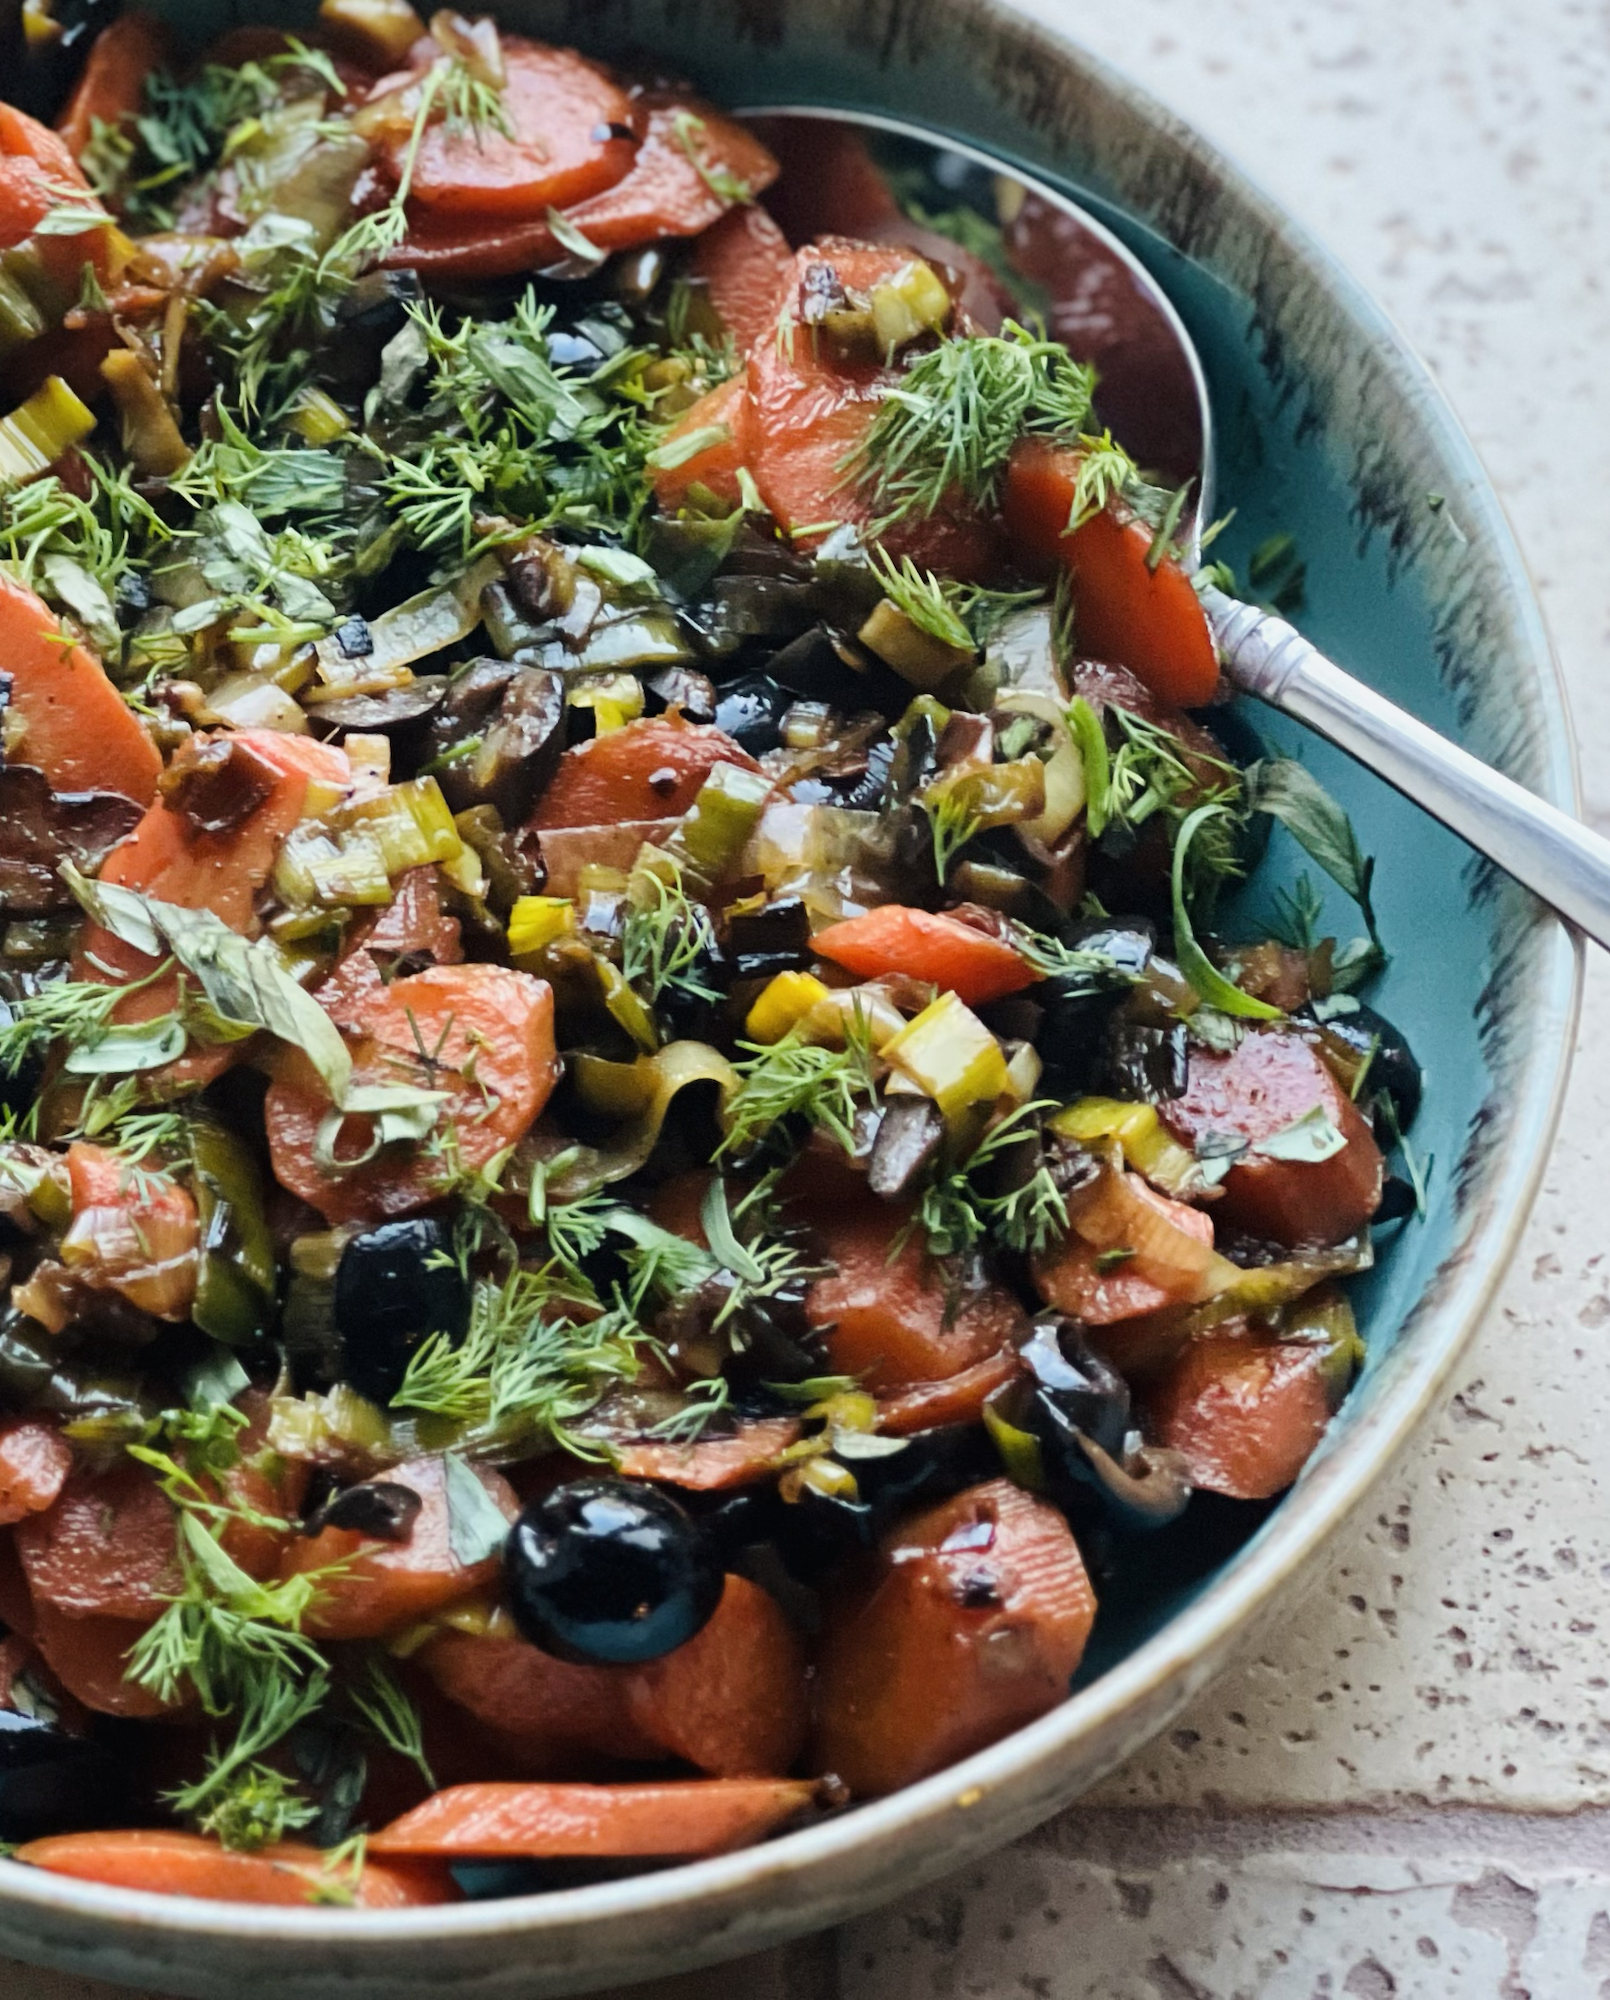 Braised Carrots And Leeks With Olives And Herbs